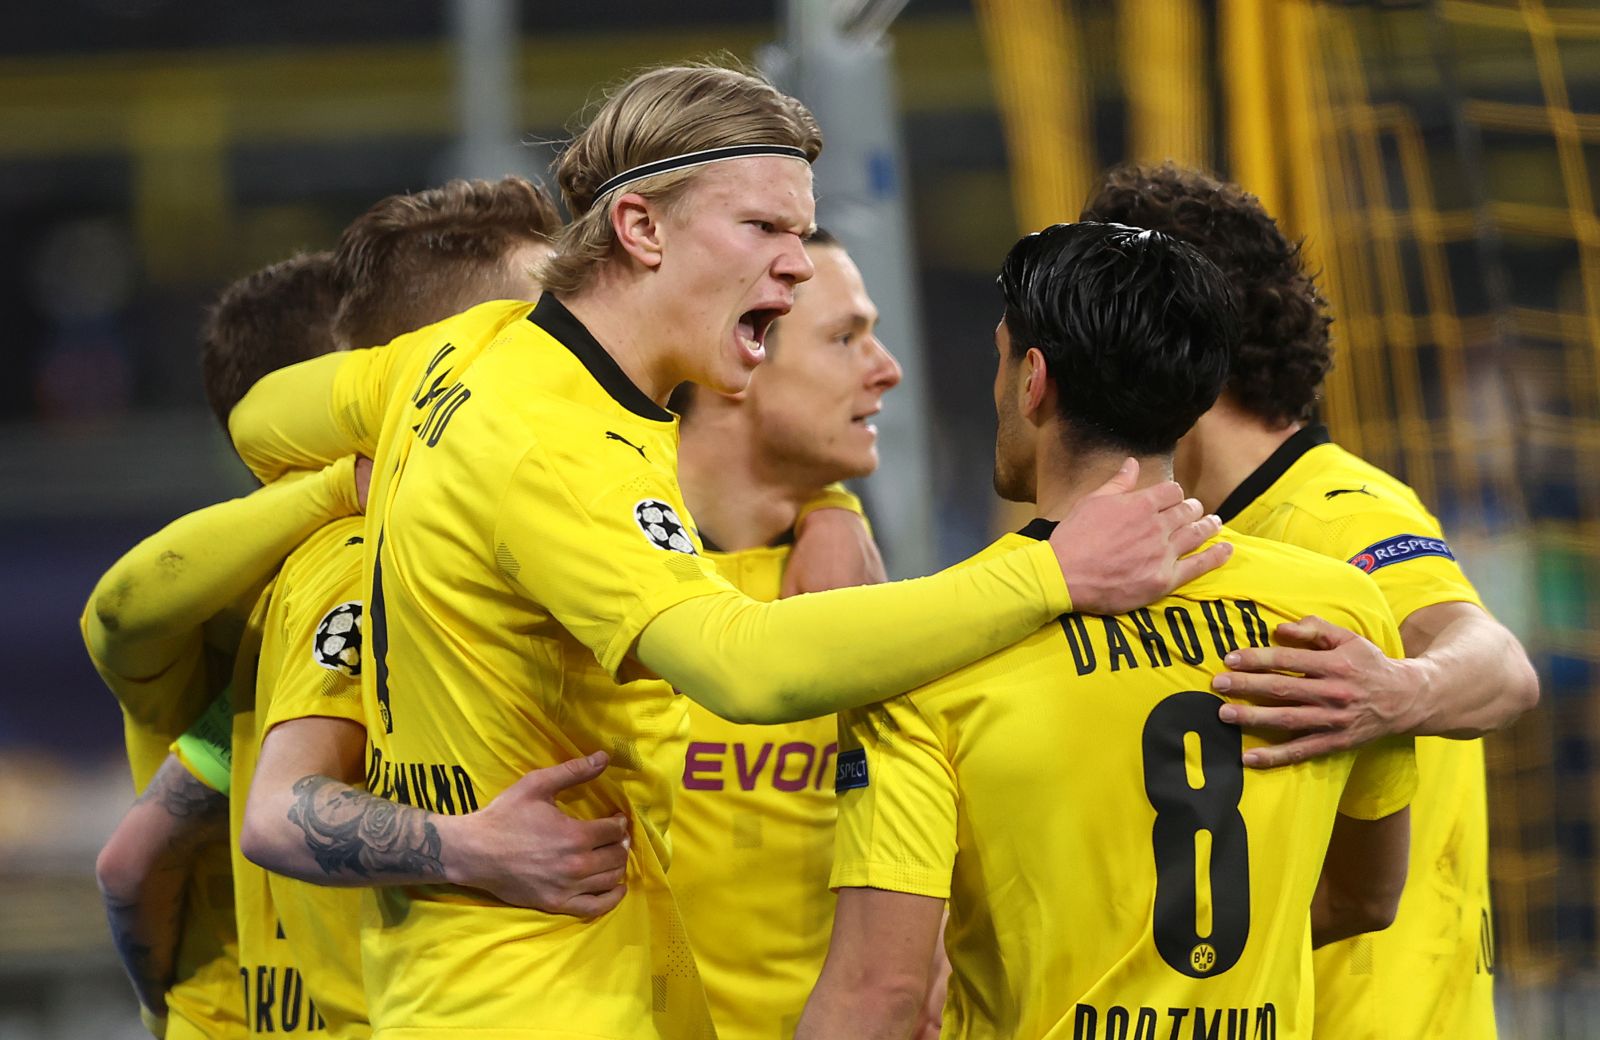 epa09064323 Erling Haaland of Borussia Dortmund (R) celebrates with Mahmoud Dahoud after scoring their side's first goal during the UEFA Champions League Round of 16, second leg match between Borussia Dortmund and Sevilla FC in Dortmund, Germany, 09 March 2021.  EPA/LARS BARON / POOL